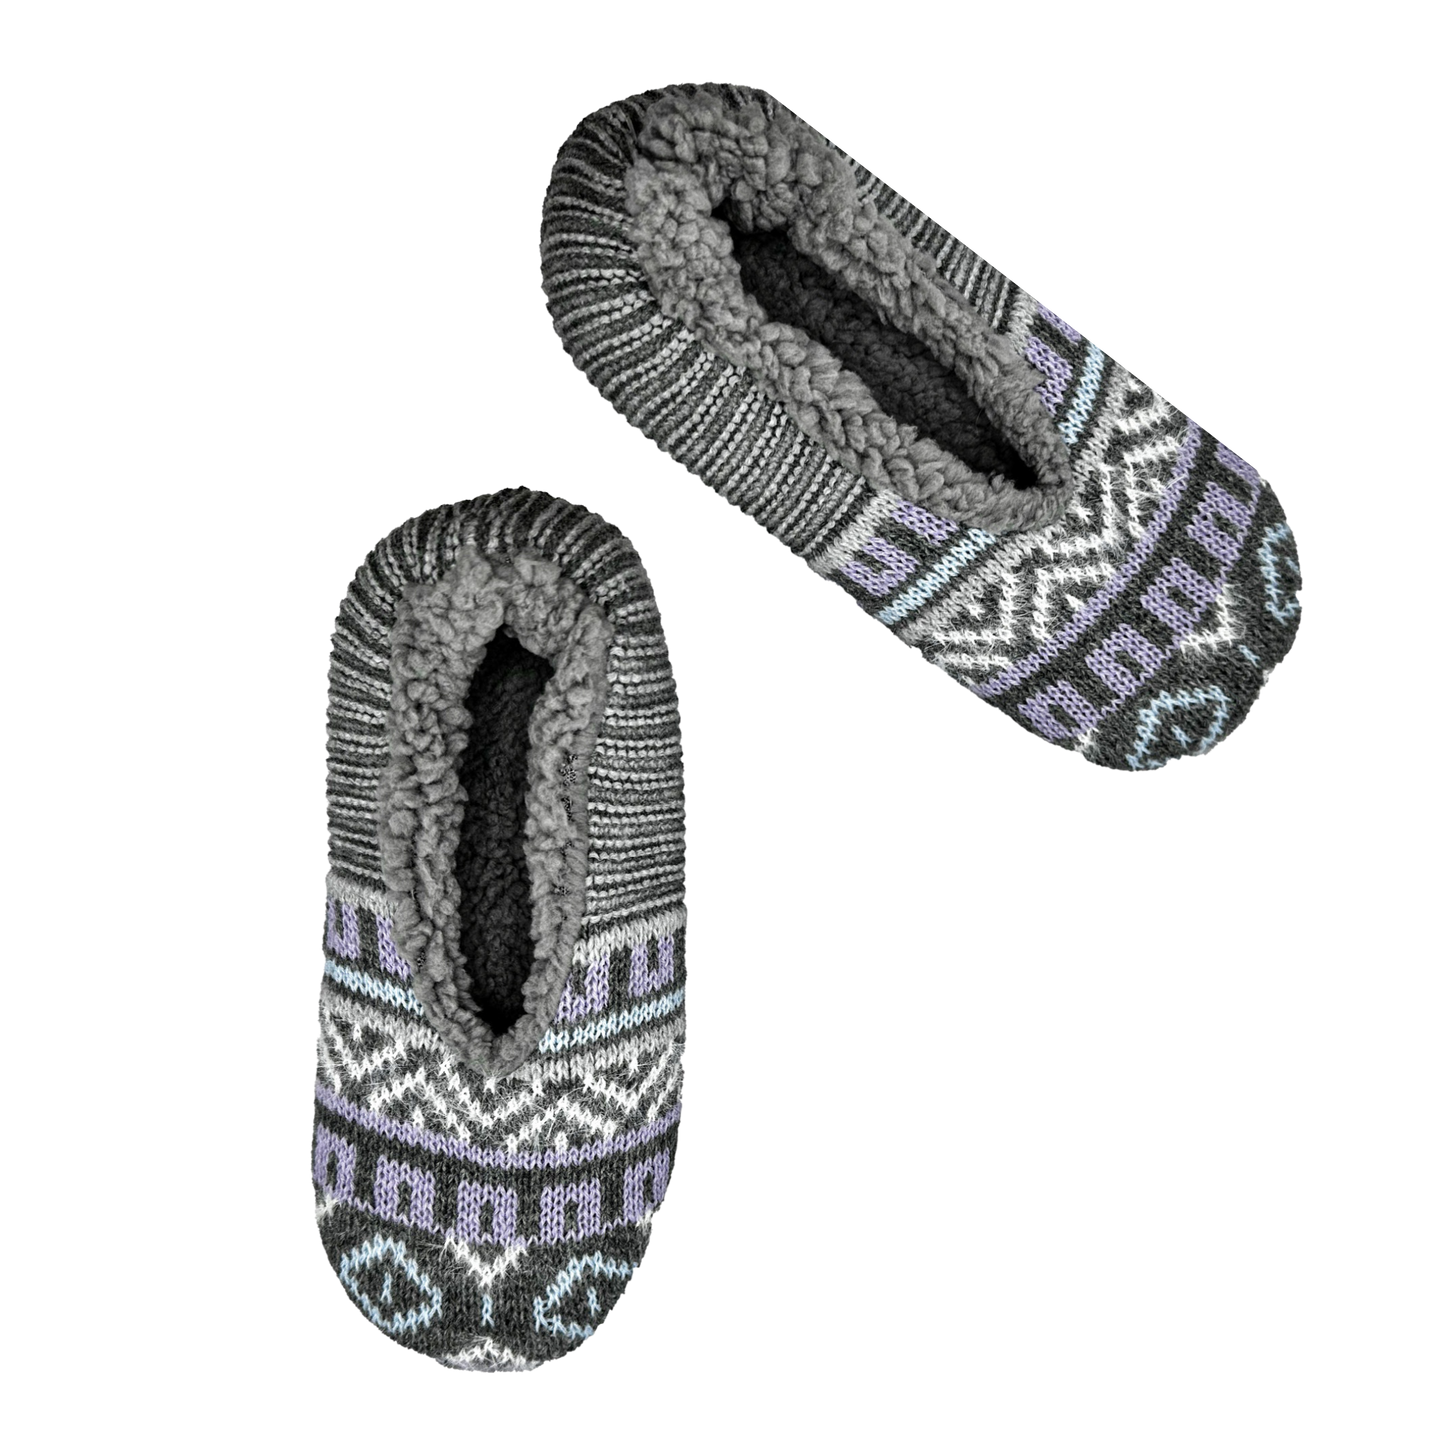 A pair of cozy, plush slippers in a neutral gray and purple color. The slippers have a soft, fluffy upper and a cushioned sole. They are perfect for keeping your feet warm and comfortable on cold days.